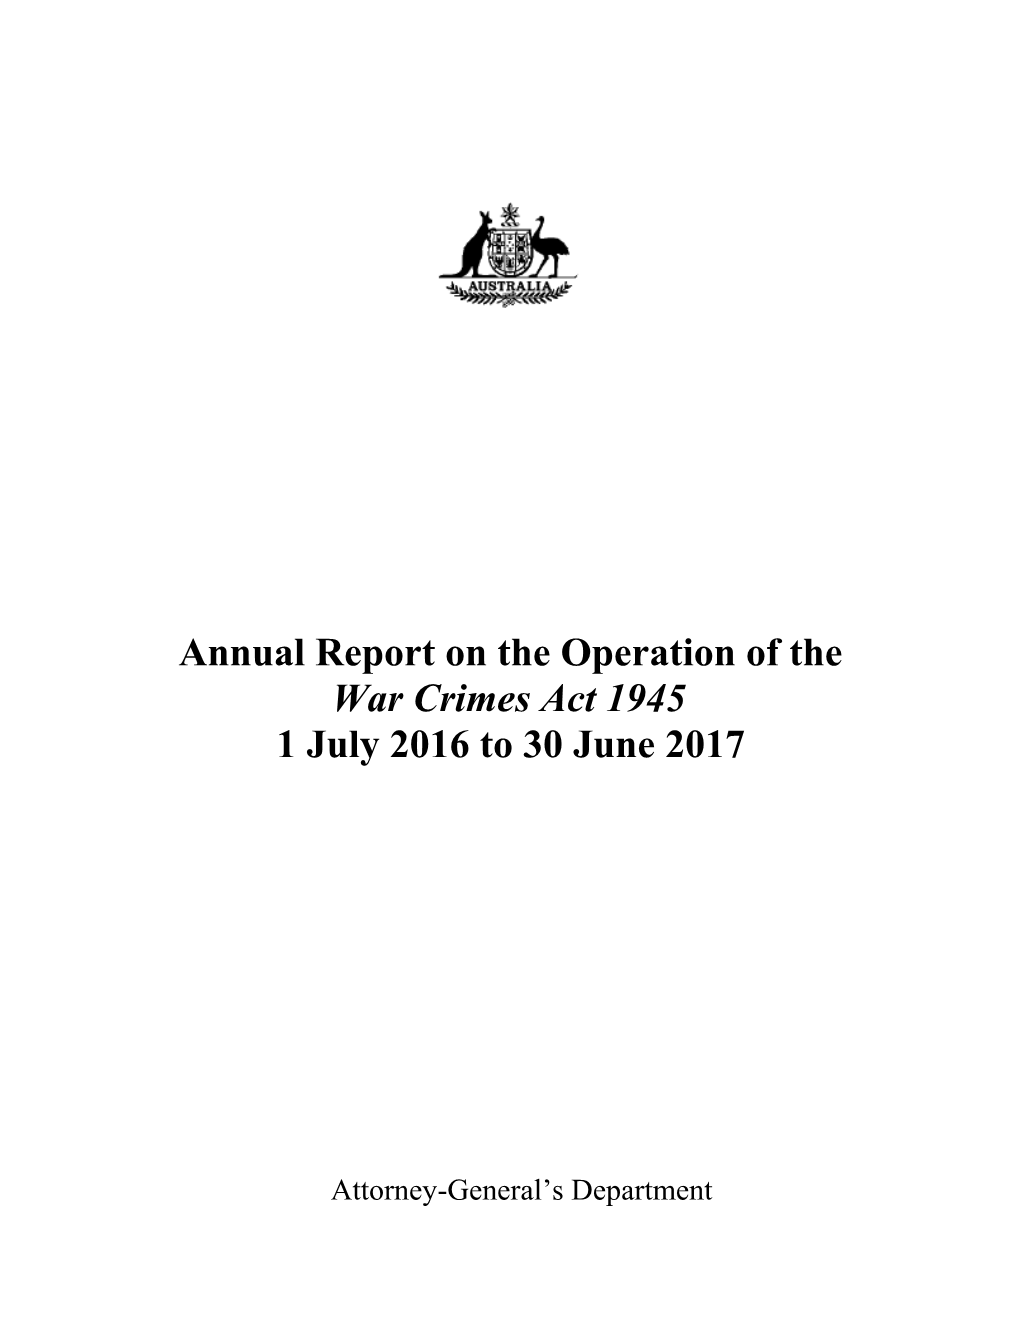 Report-On-The-Operation-Of-The-War-Crimes-Act-1945-To-30-June-2017